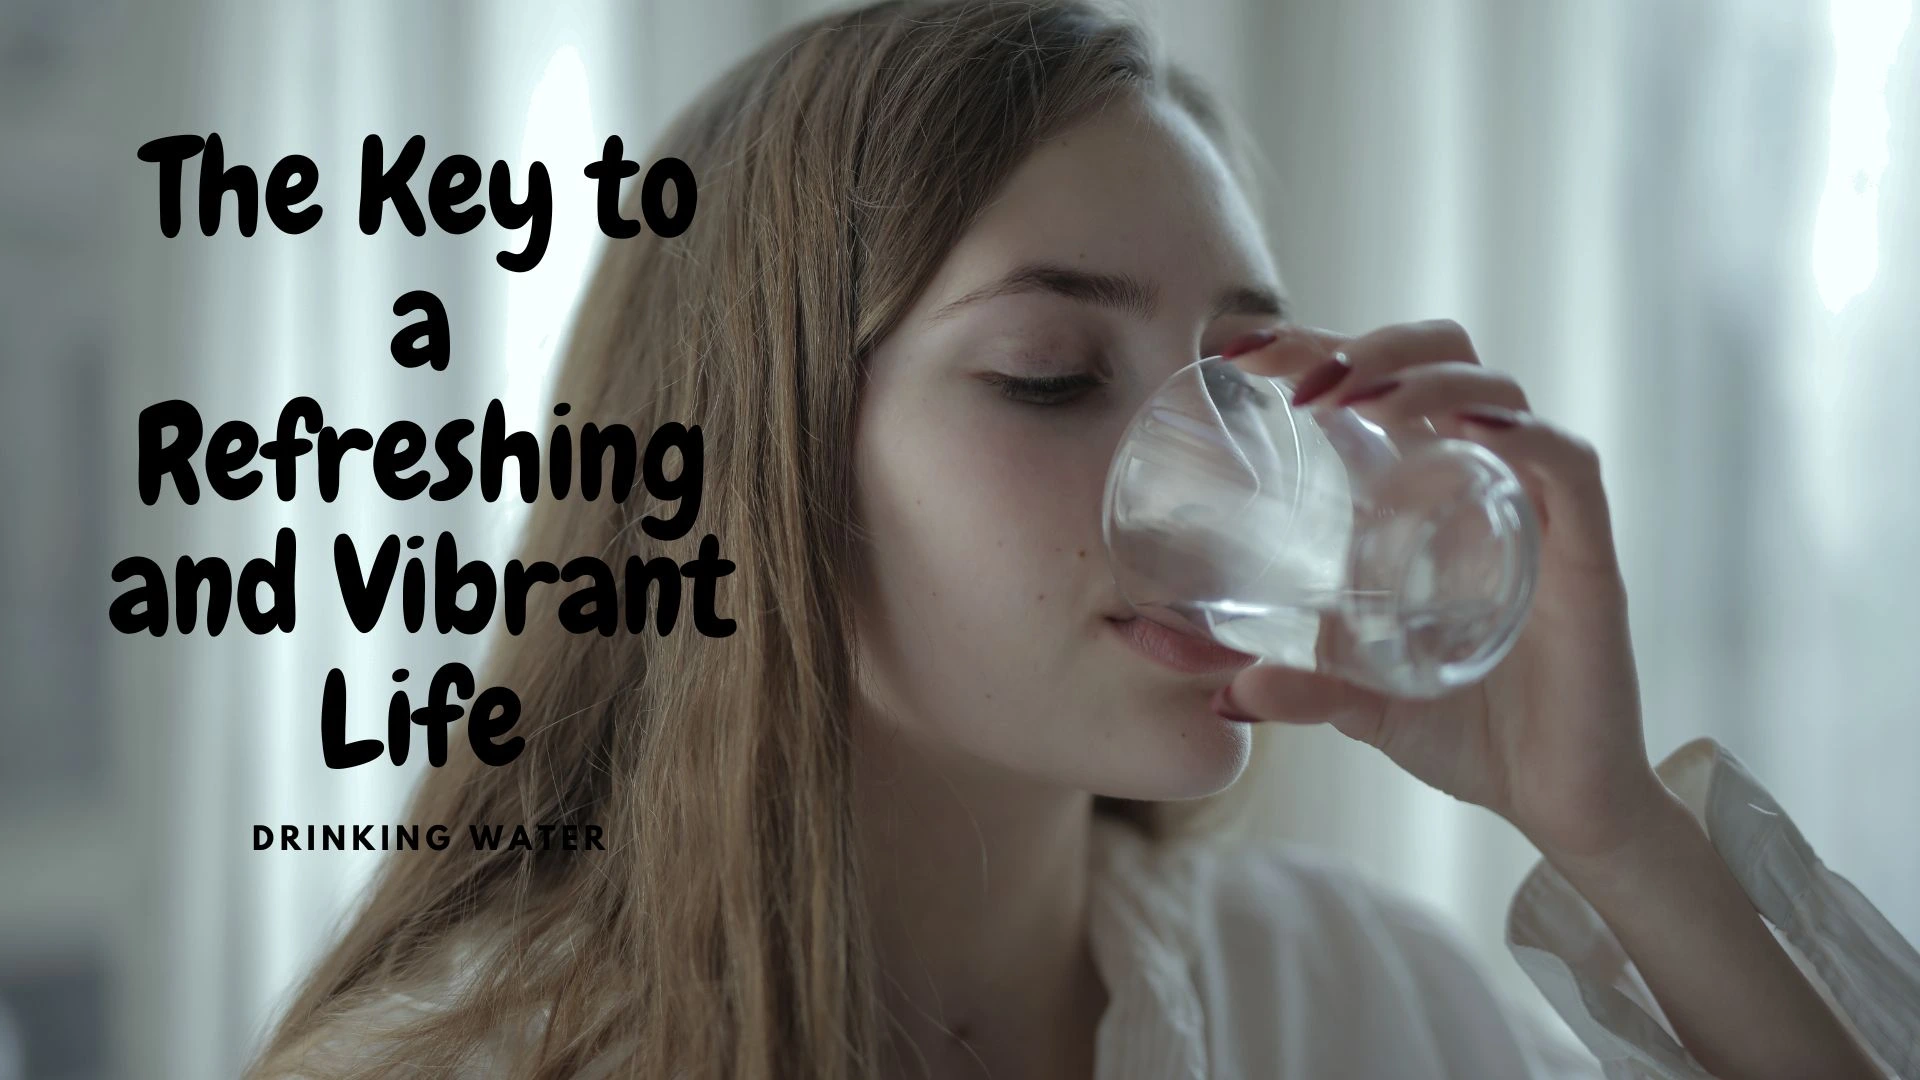  Drinking Water Health: The Key to a Refreshing and Vibrant Life